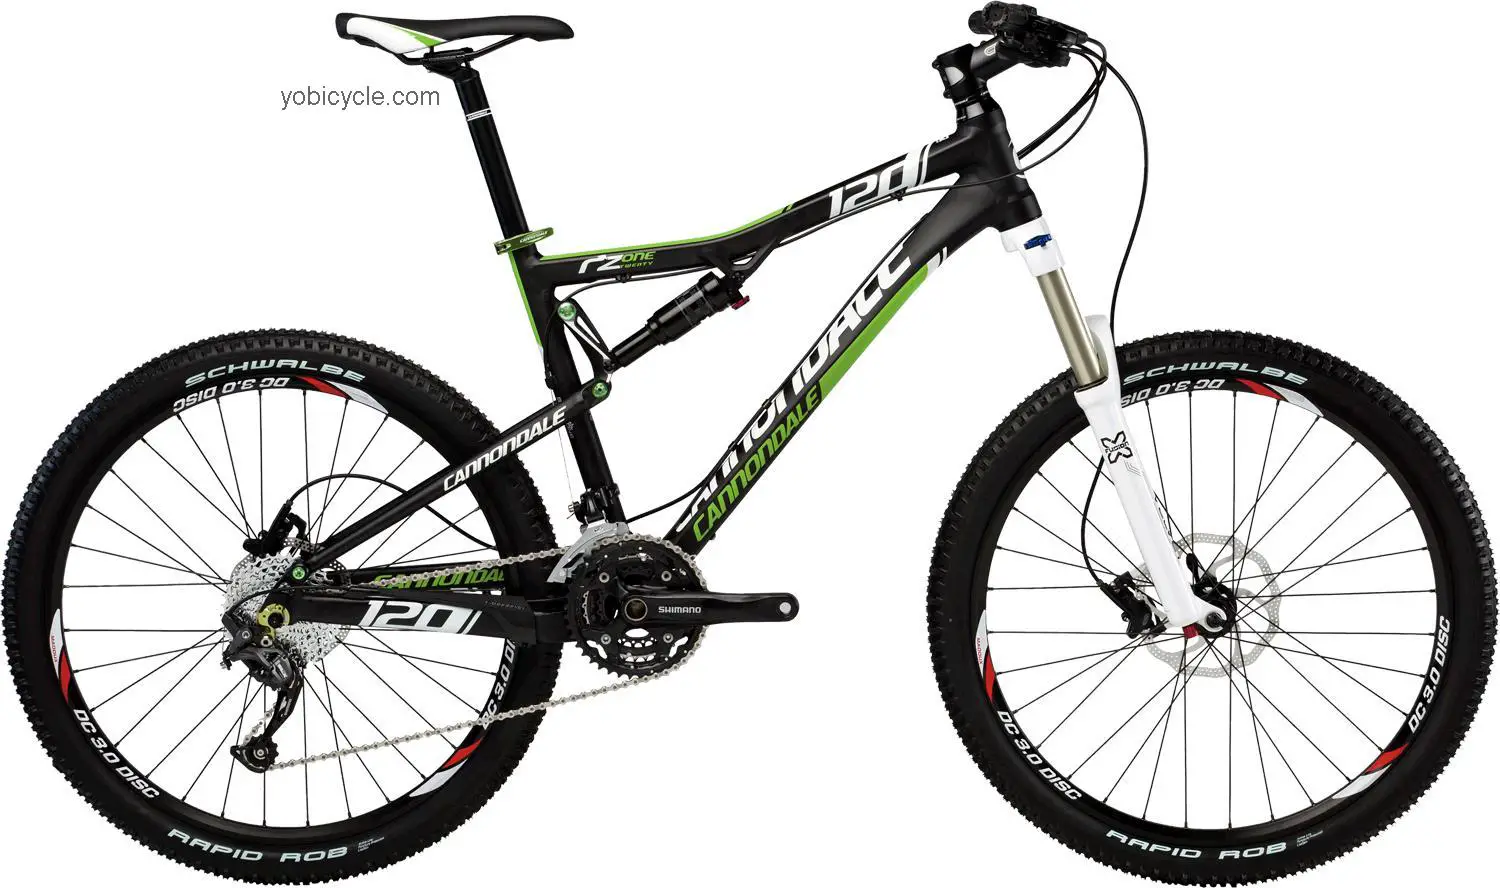 Cannondale RZ120 2 competitors and comparison tool online specs and performance